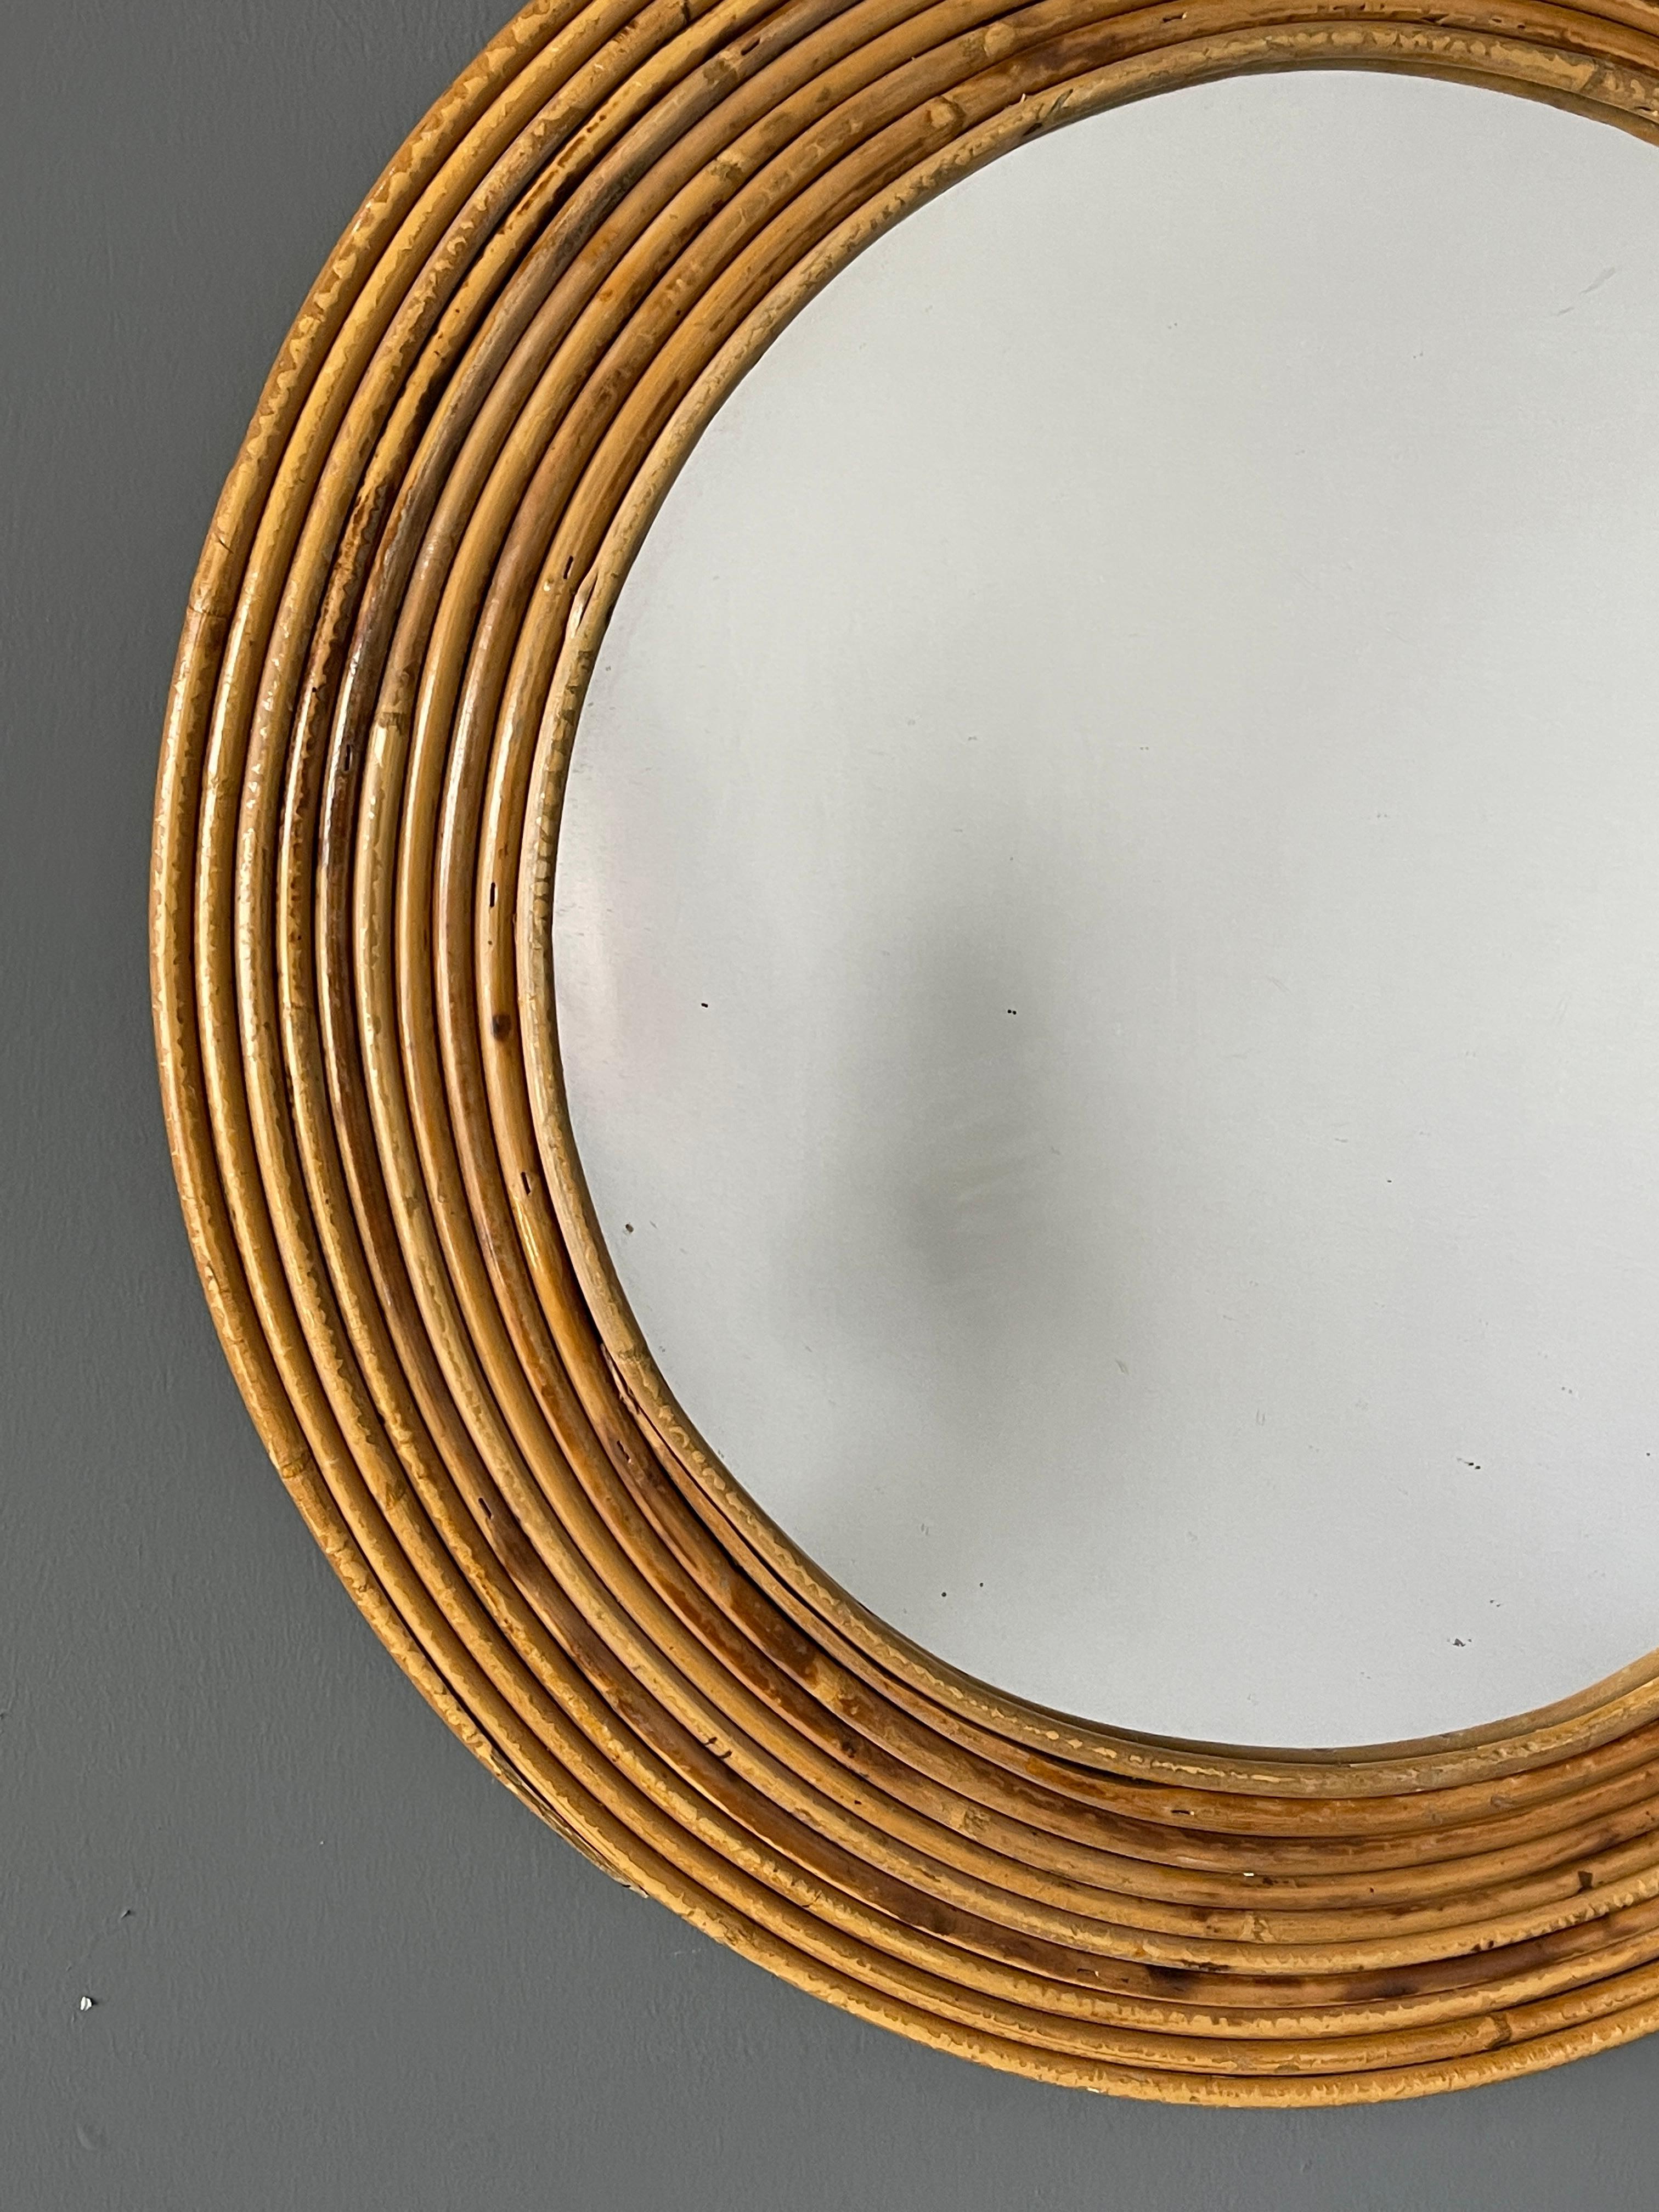 A wall mirror, produced in Italy, 1950s. Cut mirror glass is framed in bamboo and rattan

Other designers of the period include Gio Ponti, Fontana Arte, Max Ingrand, Franco Albini, and Josef Frank.